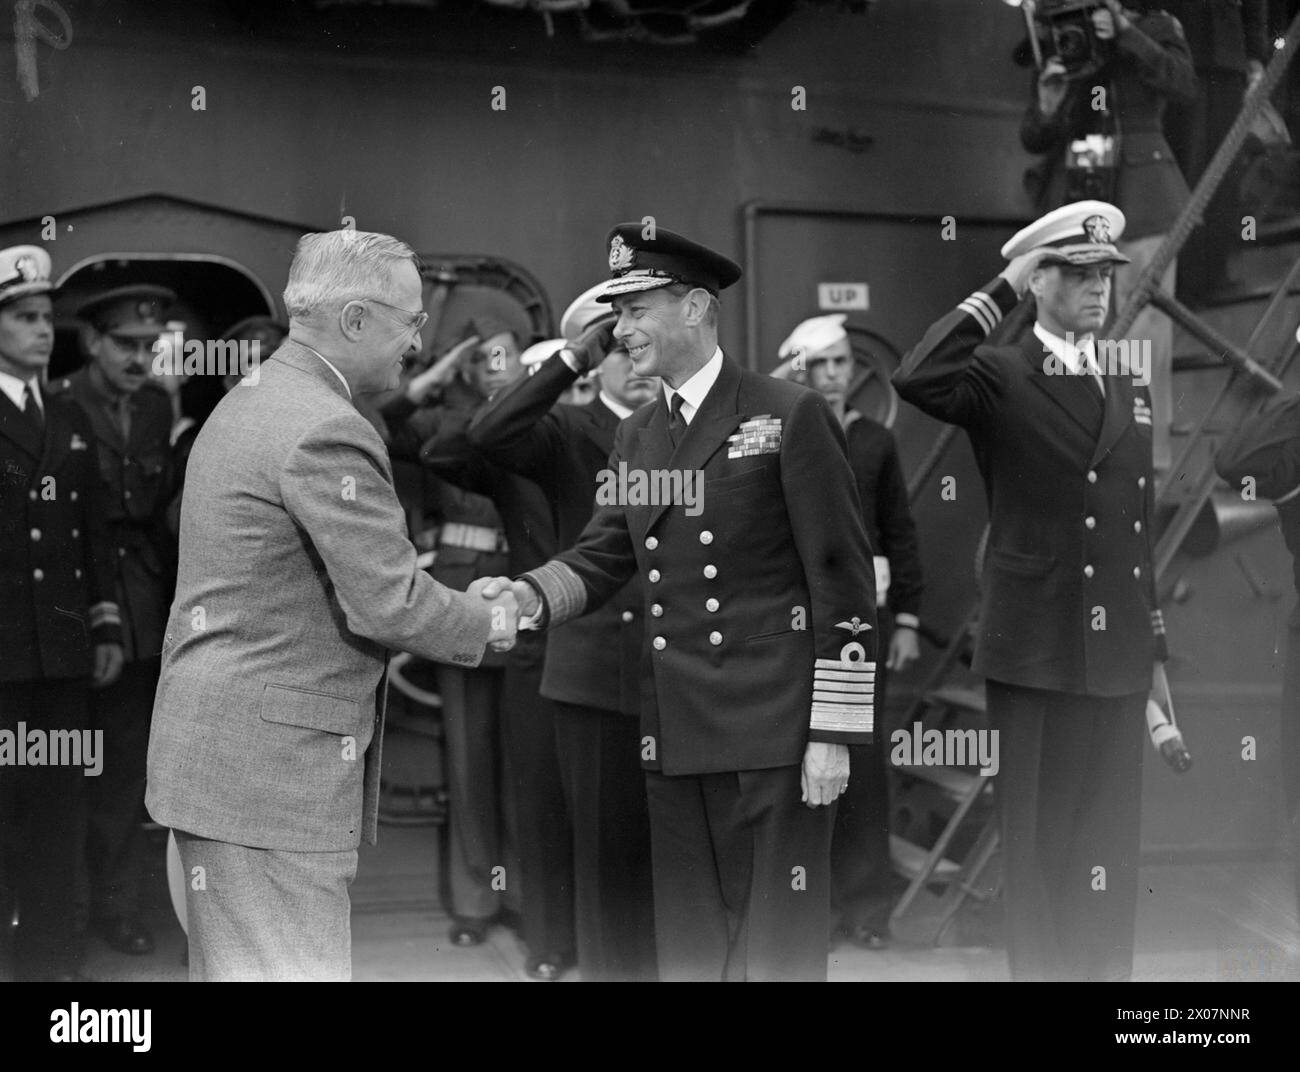 VISIT OF PRESIDENT TRUMAN. 2 AUGUST 1945, ON BOARD USS AUGUSTA, AT PLYMOUTH. PRESIDENT OF THE UNITED STATES, MR HARRY TRUMAN VISITED GREAT BRITAIN FOR THE FIRST TIME, AND WAS MET BY HM THE KING ON BOARD HMS RENOWN AT PLYMOUTH. - President Truman greeting HM The King when he visited USS AUGUSTA Stock Photo